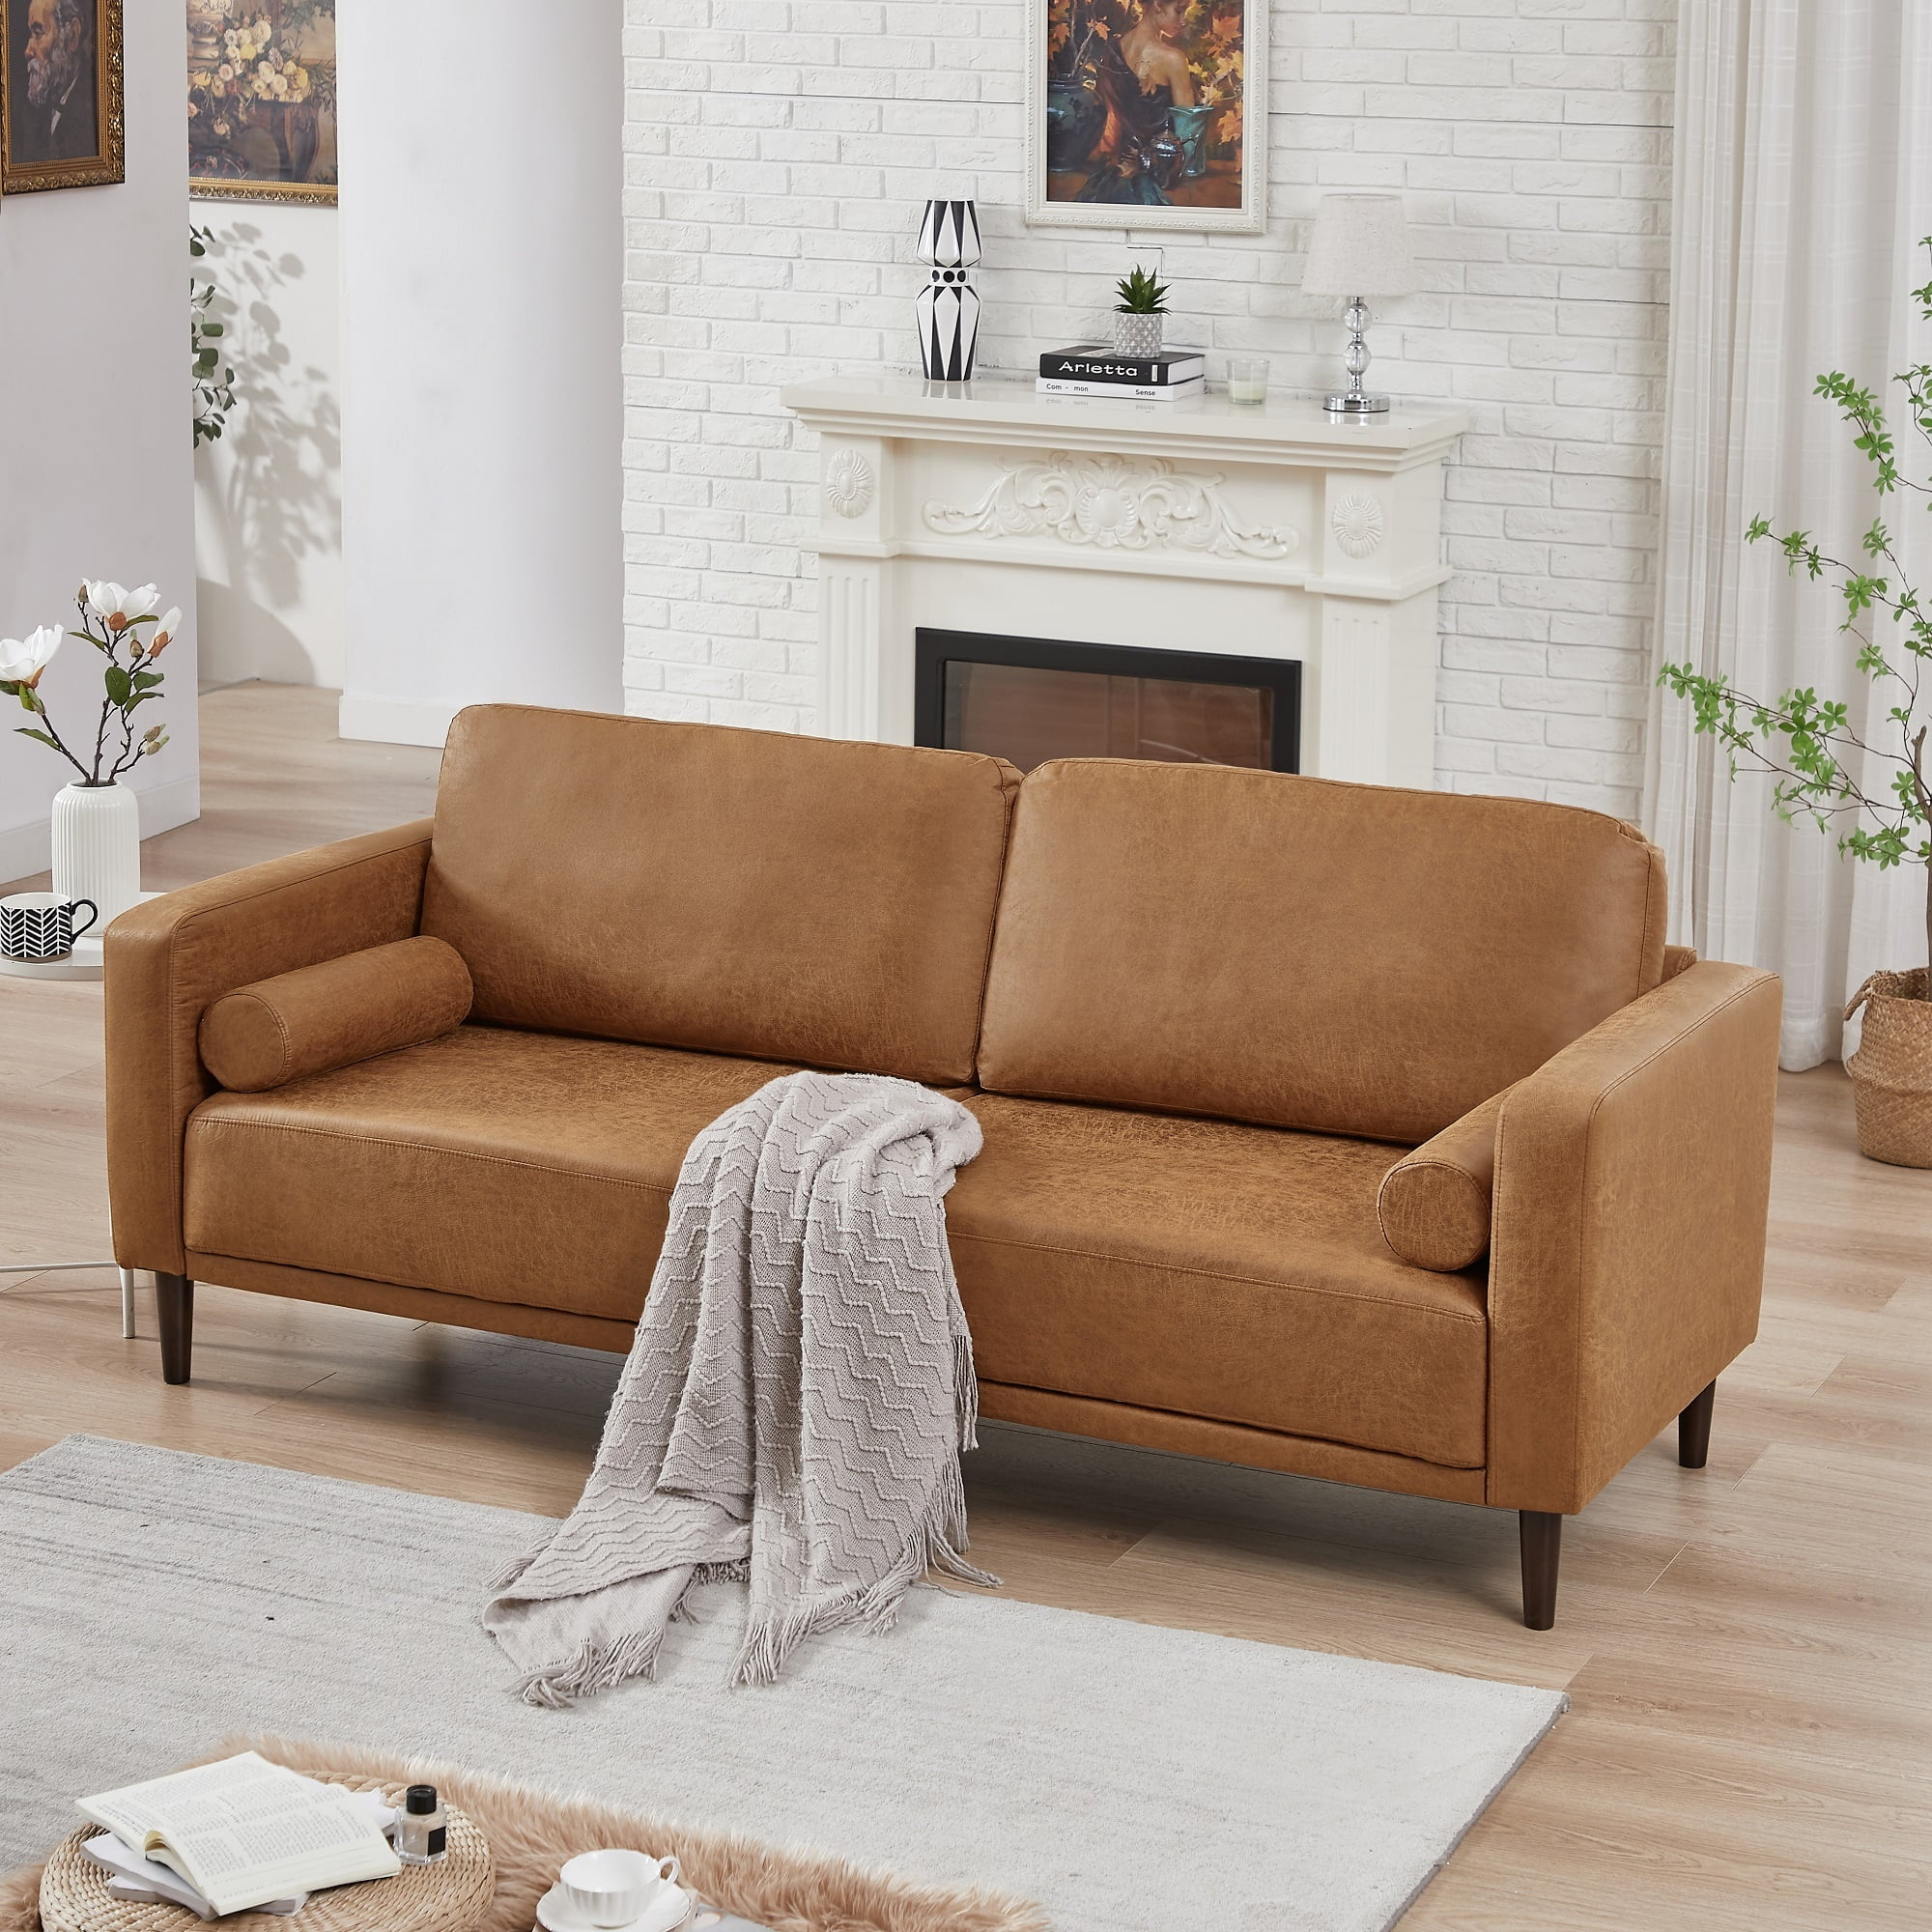 Homfa 3 Seat Sofa, 78.9'' Modern Large Upholstered PU Couch with Square  Arm, Camel